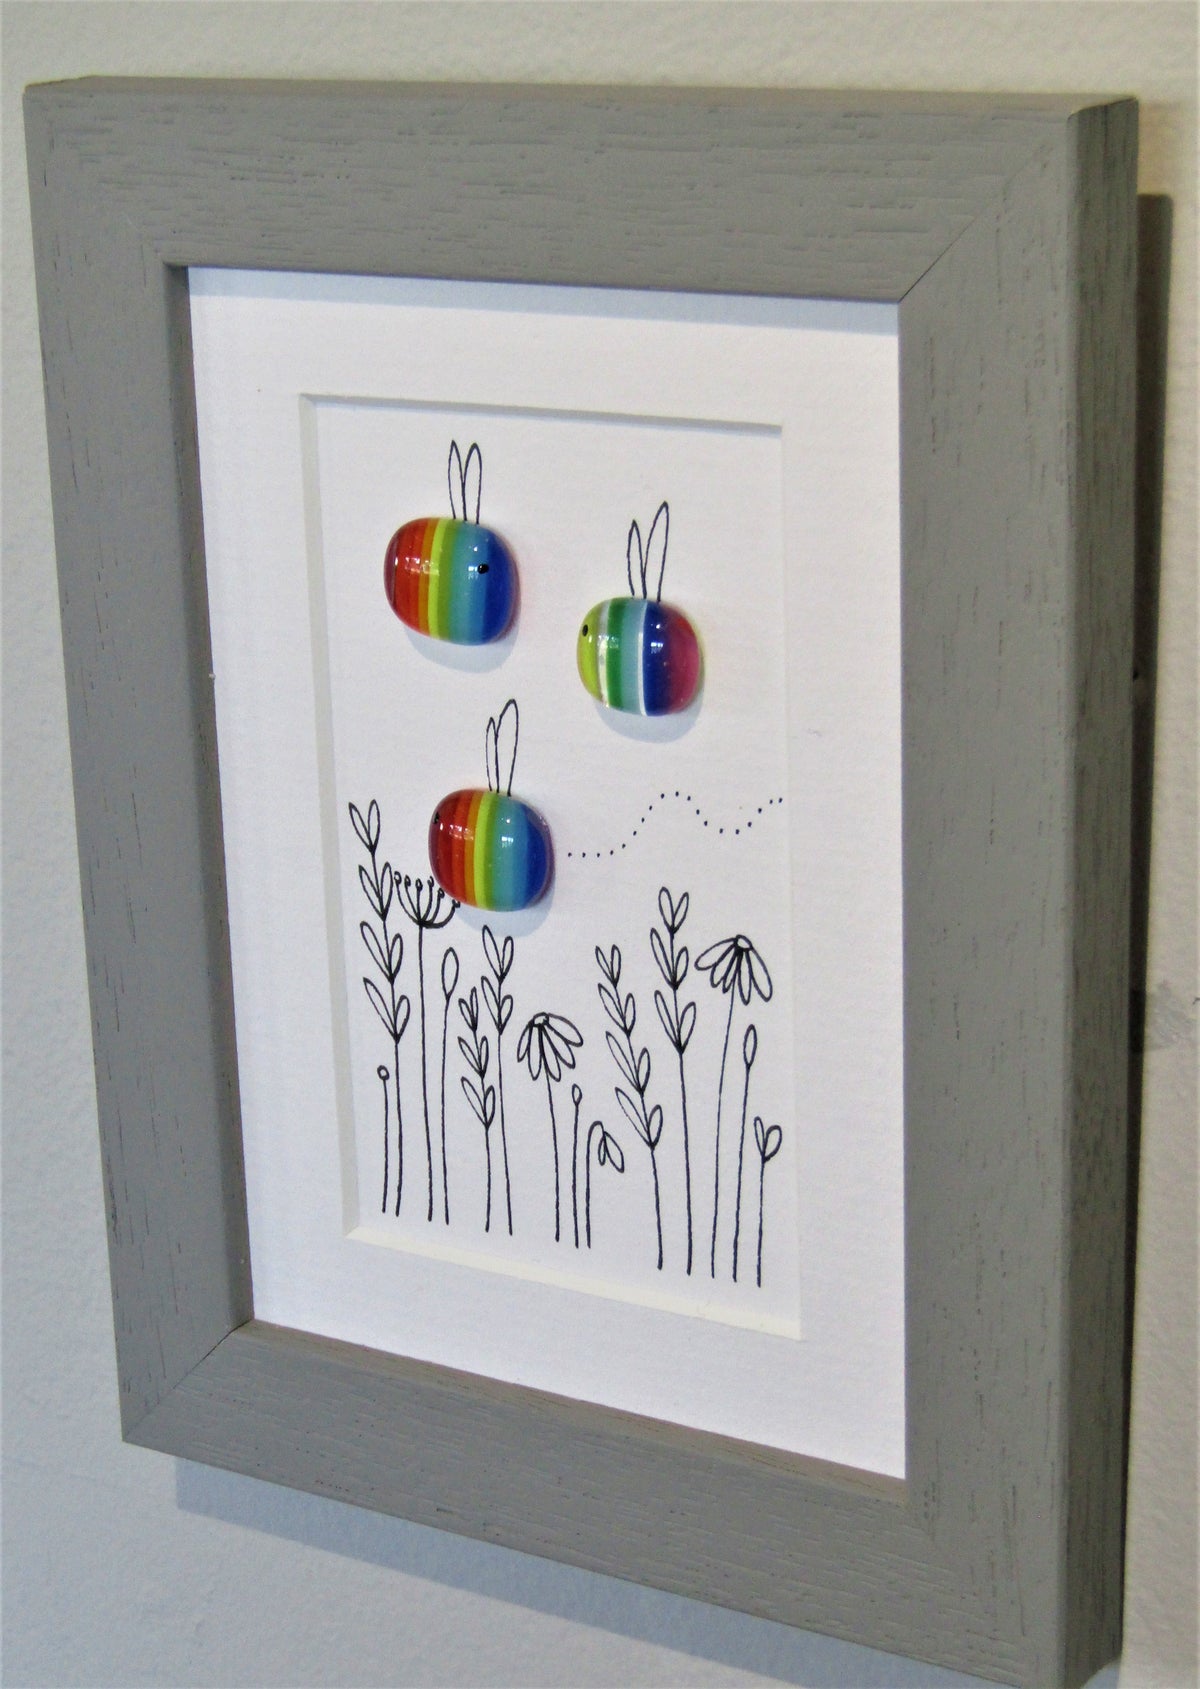 Image and Fused Glass by Niko Brown